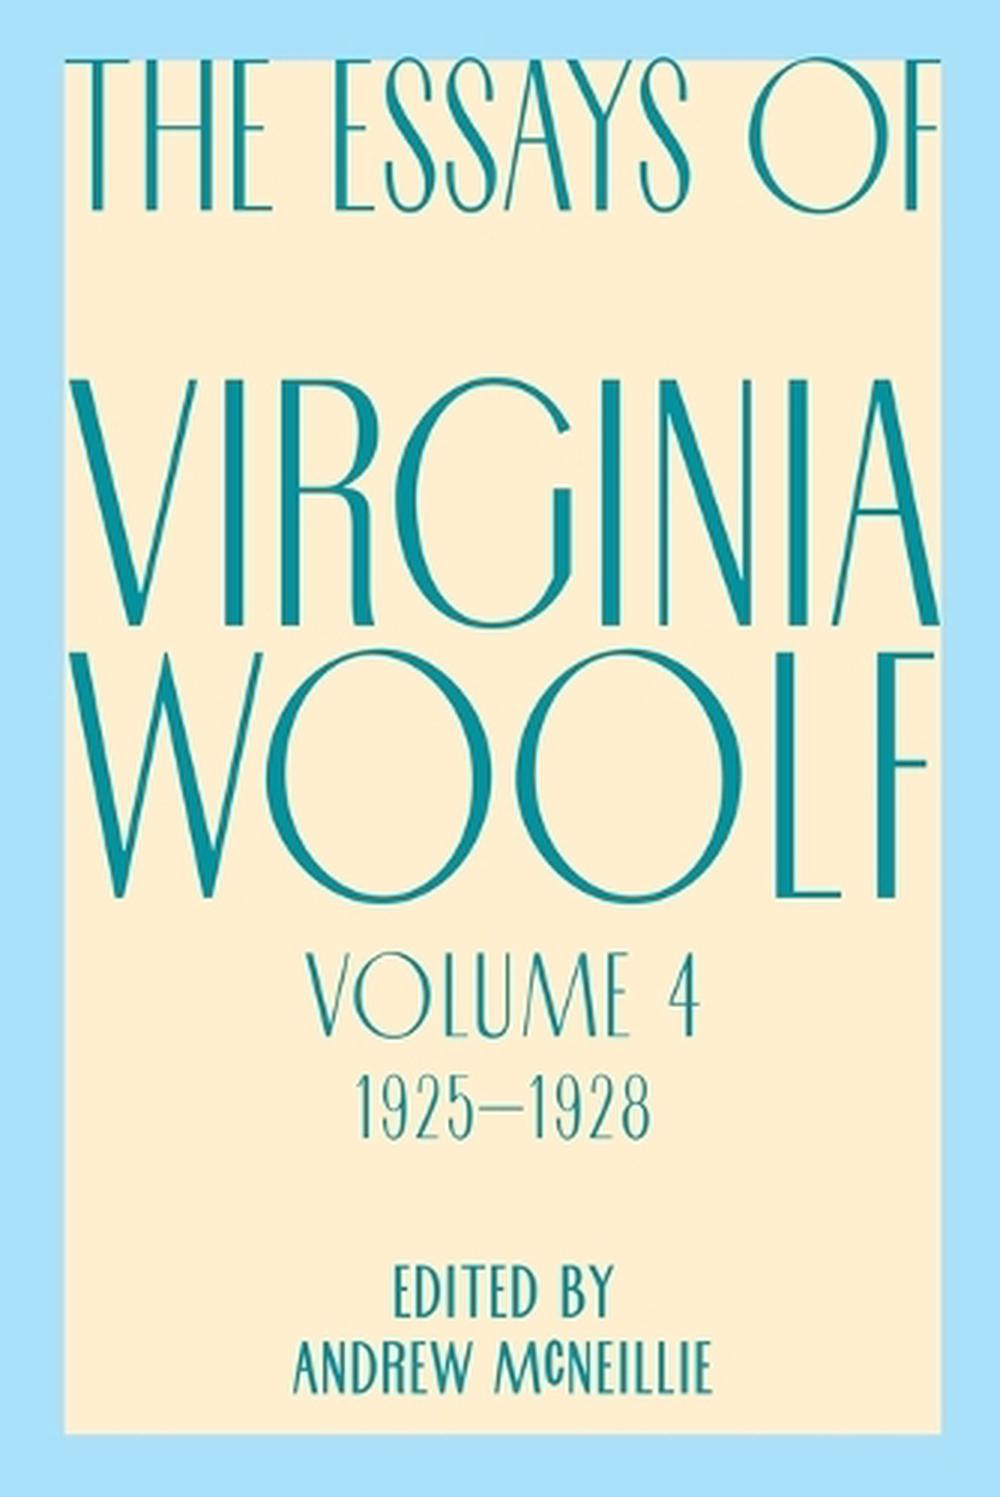 essay about virginia woolf